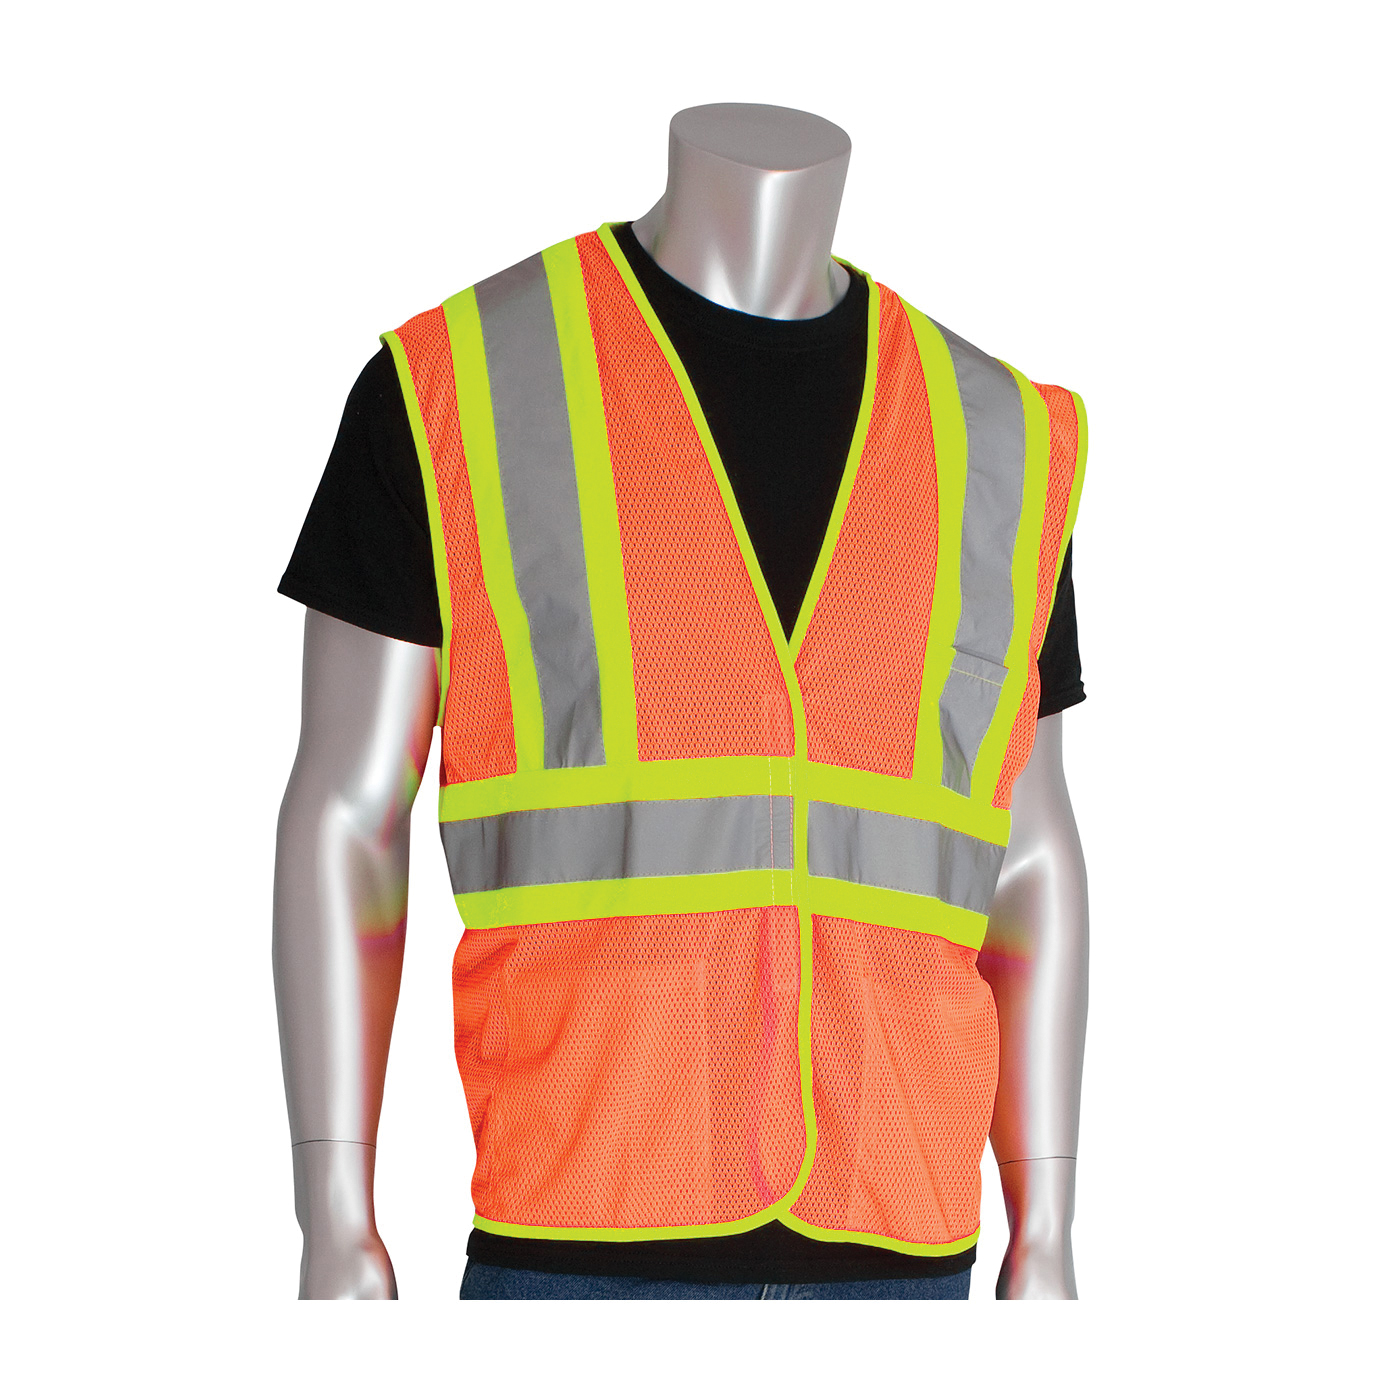 PIP® 302-MVATOR-L 2-Tone Safety Vest, L, Hi-Viz Orange, Polyester, Hook and Loop Closure, 3 Pockets, ANSI Class: Class 2, Specifications Met: ANSI Specified